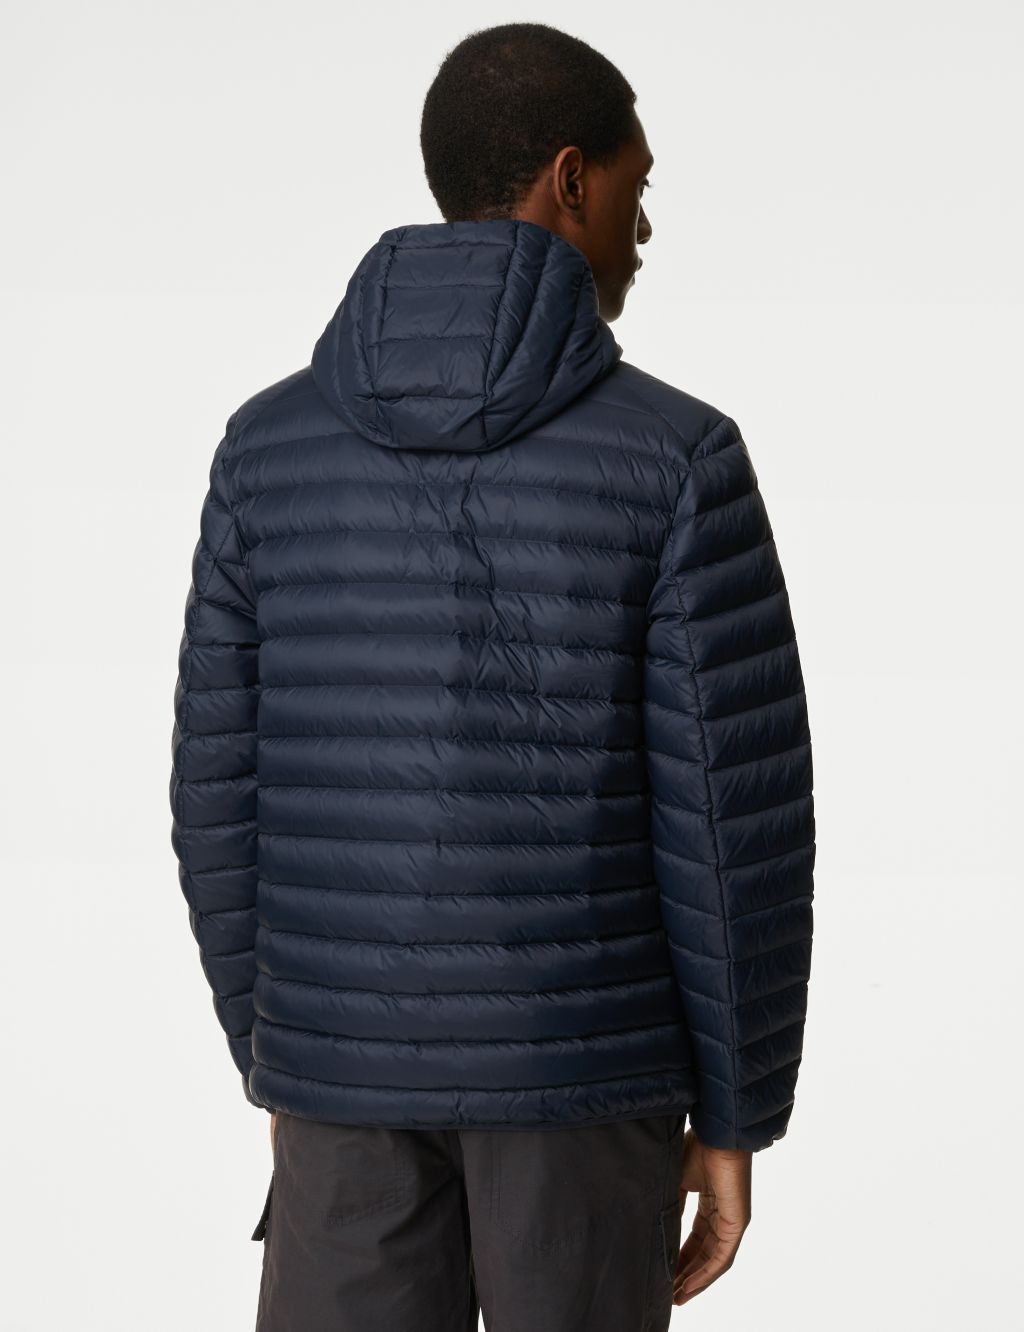 Feather and Down Jacket with Stormwear™ image 5